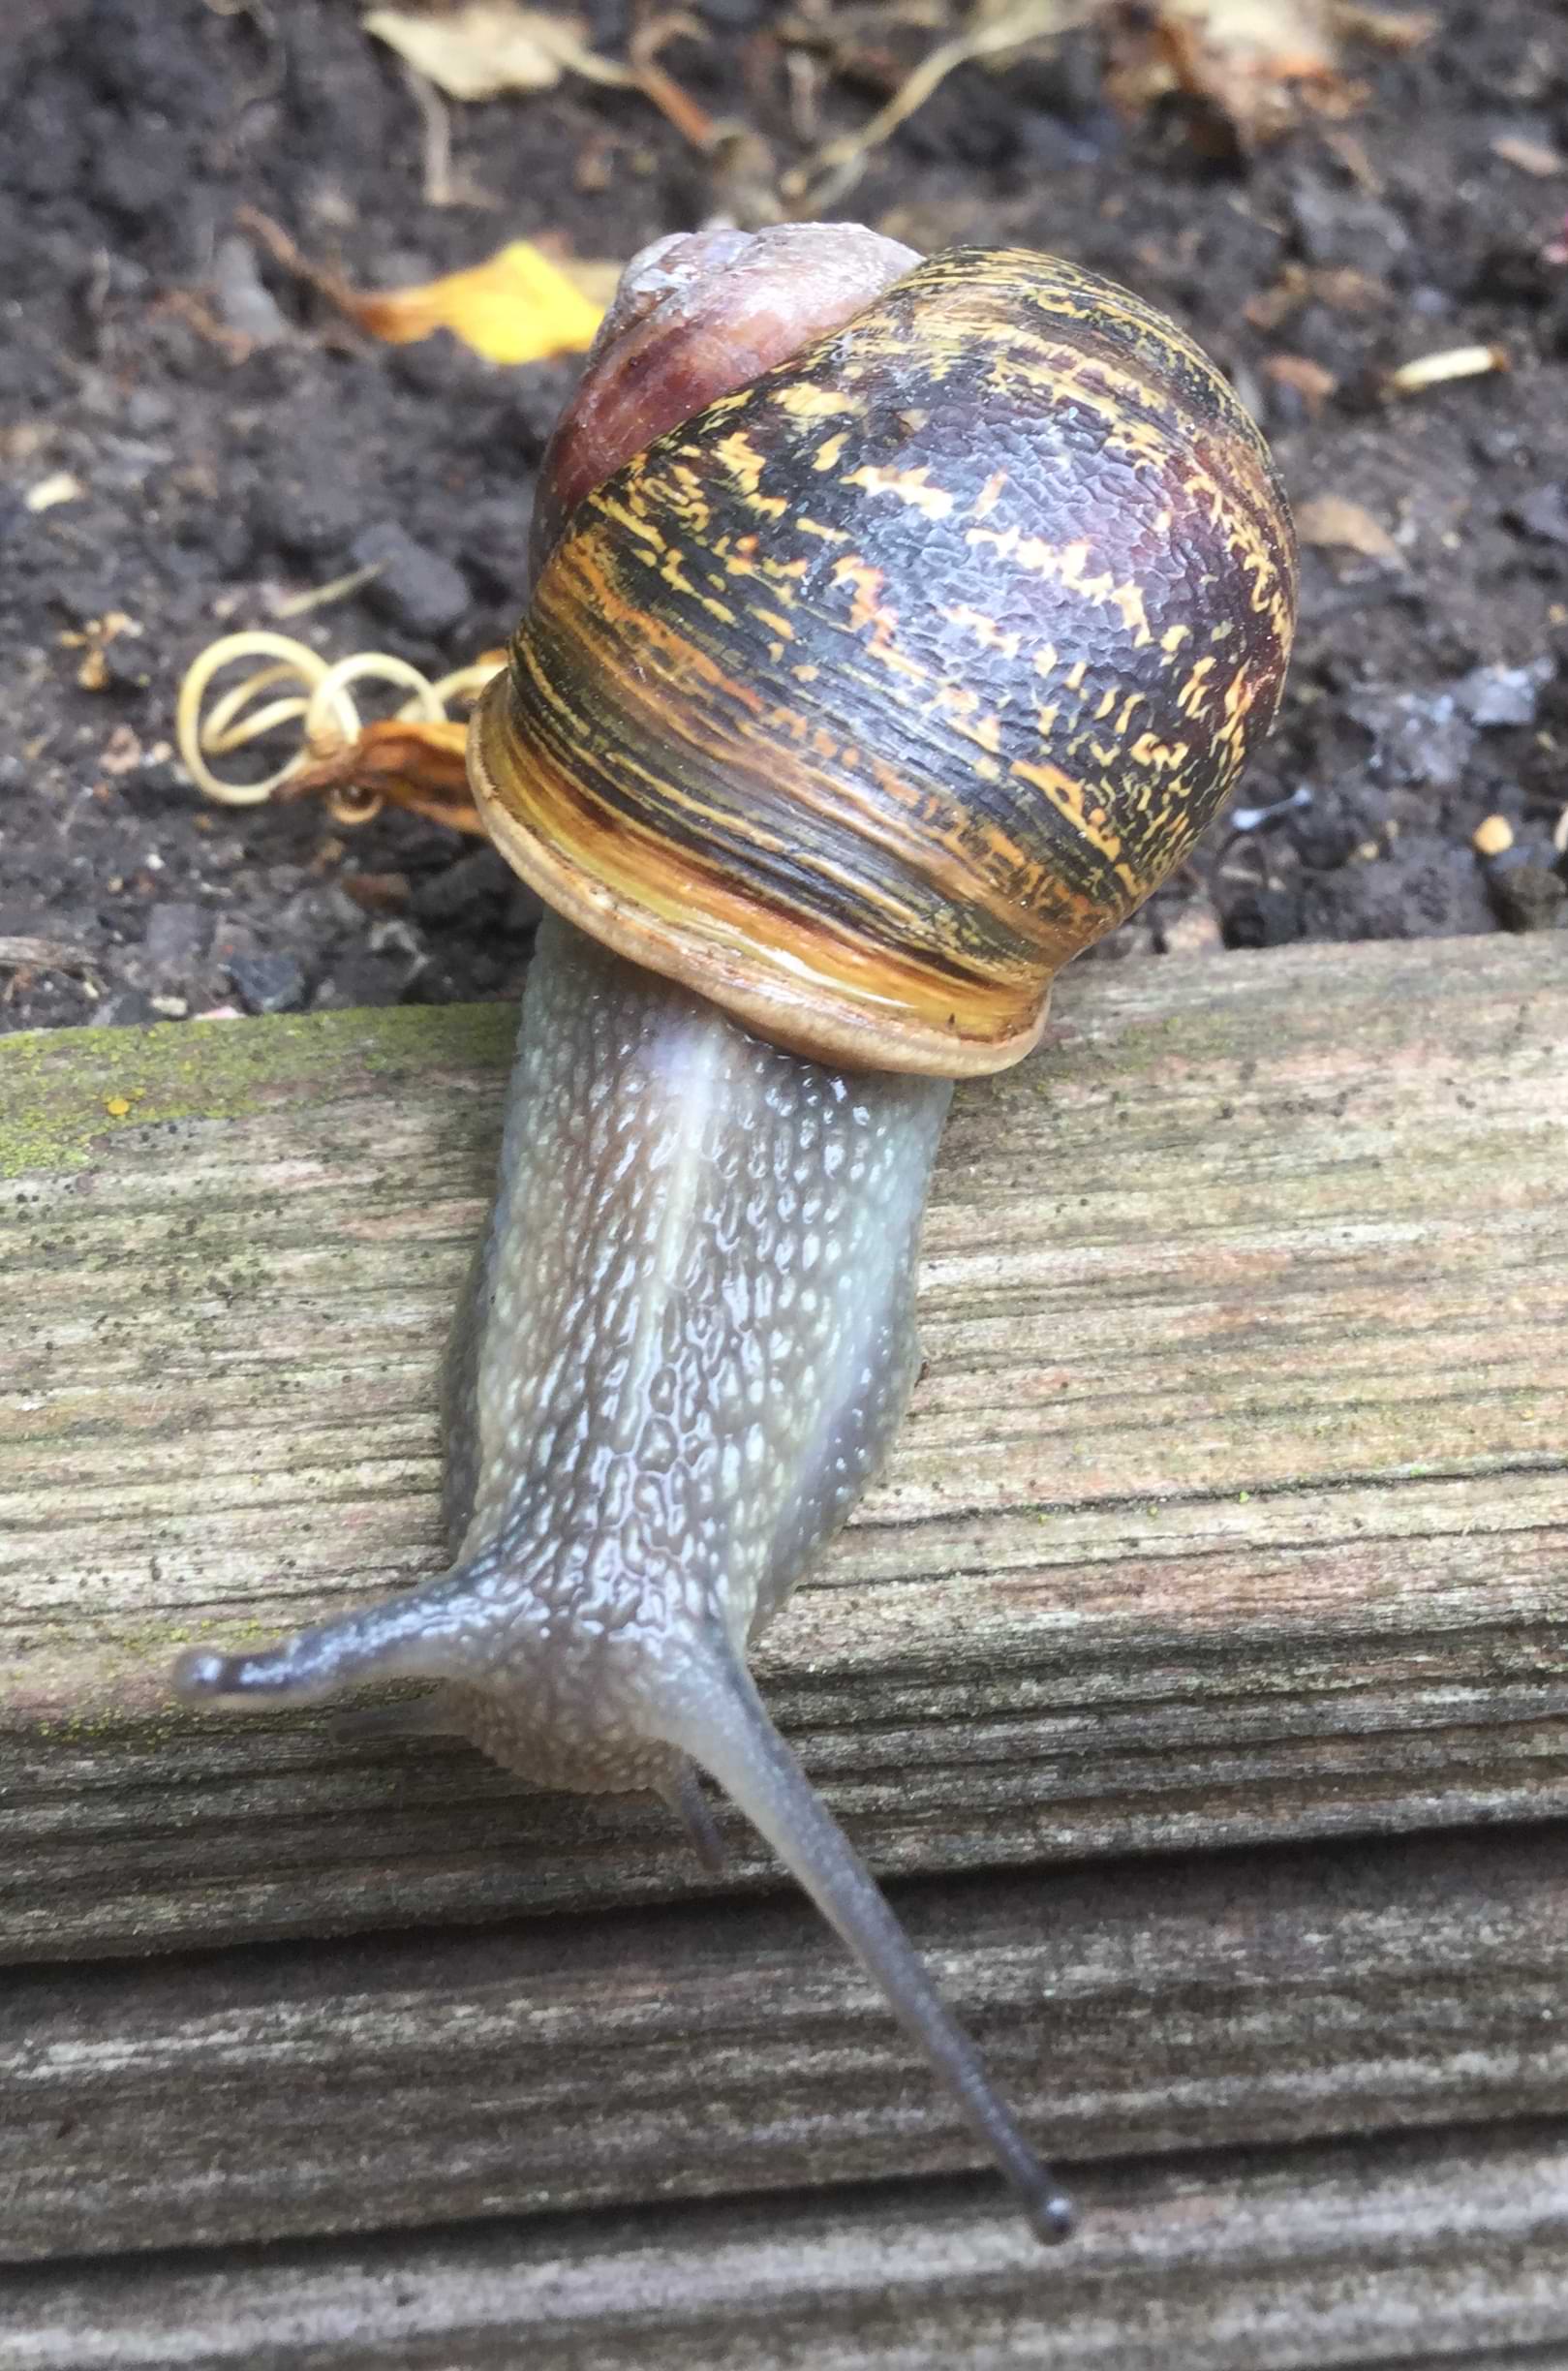 Photo of the same snail now sliding down some wood. This image give a good view of the very ends of the shell's coil, which has lost its colour and turned white. Also clear here is the length difference between her two eyestalks: the healthy one is stretched out twice as long as her damaged one.